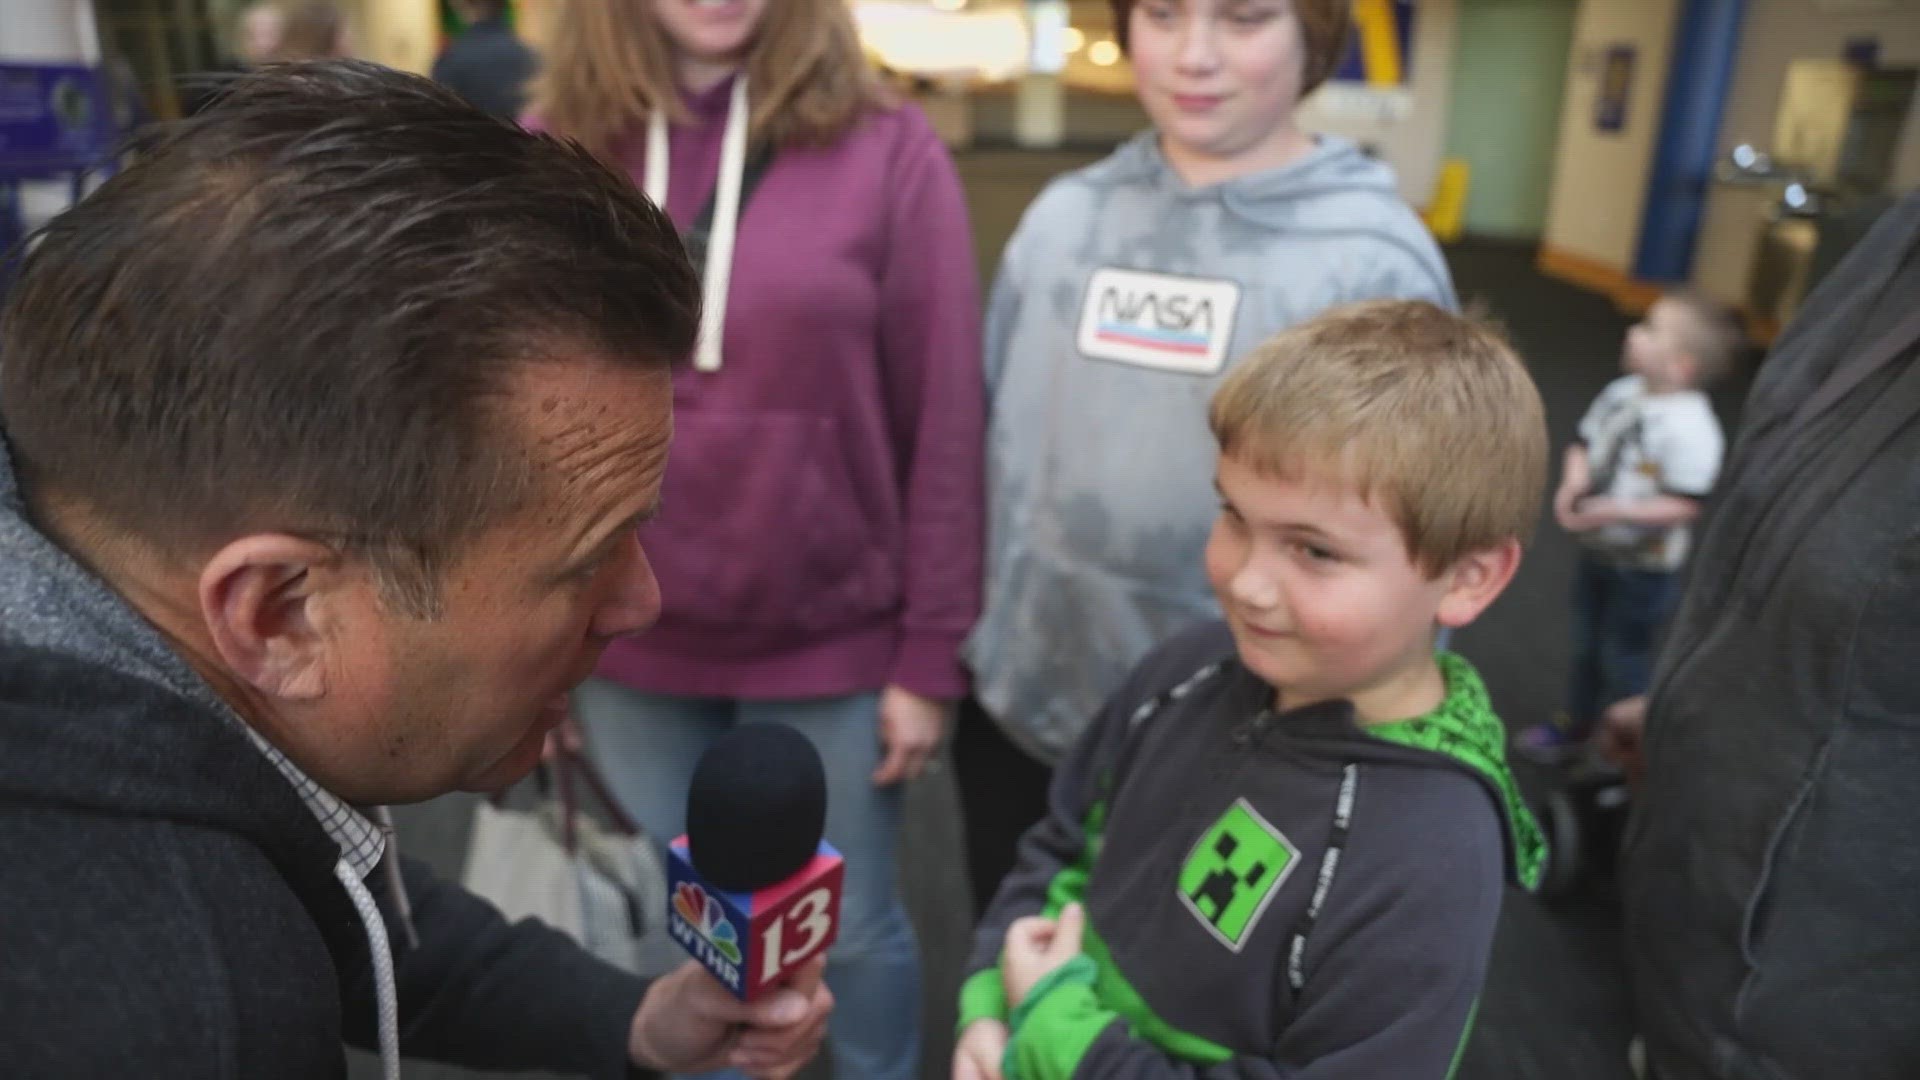 13Sports director Dave Calabro visits the Children's Museum of Indianapolis on "Incredible Kid Day" to see who can tell him some Good News!